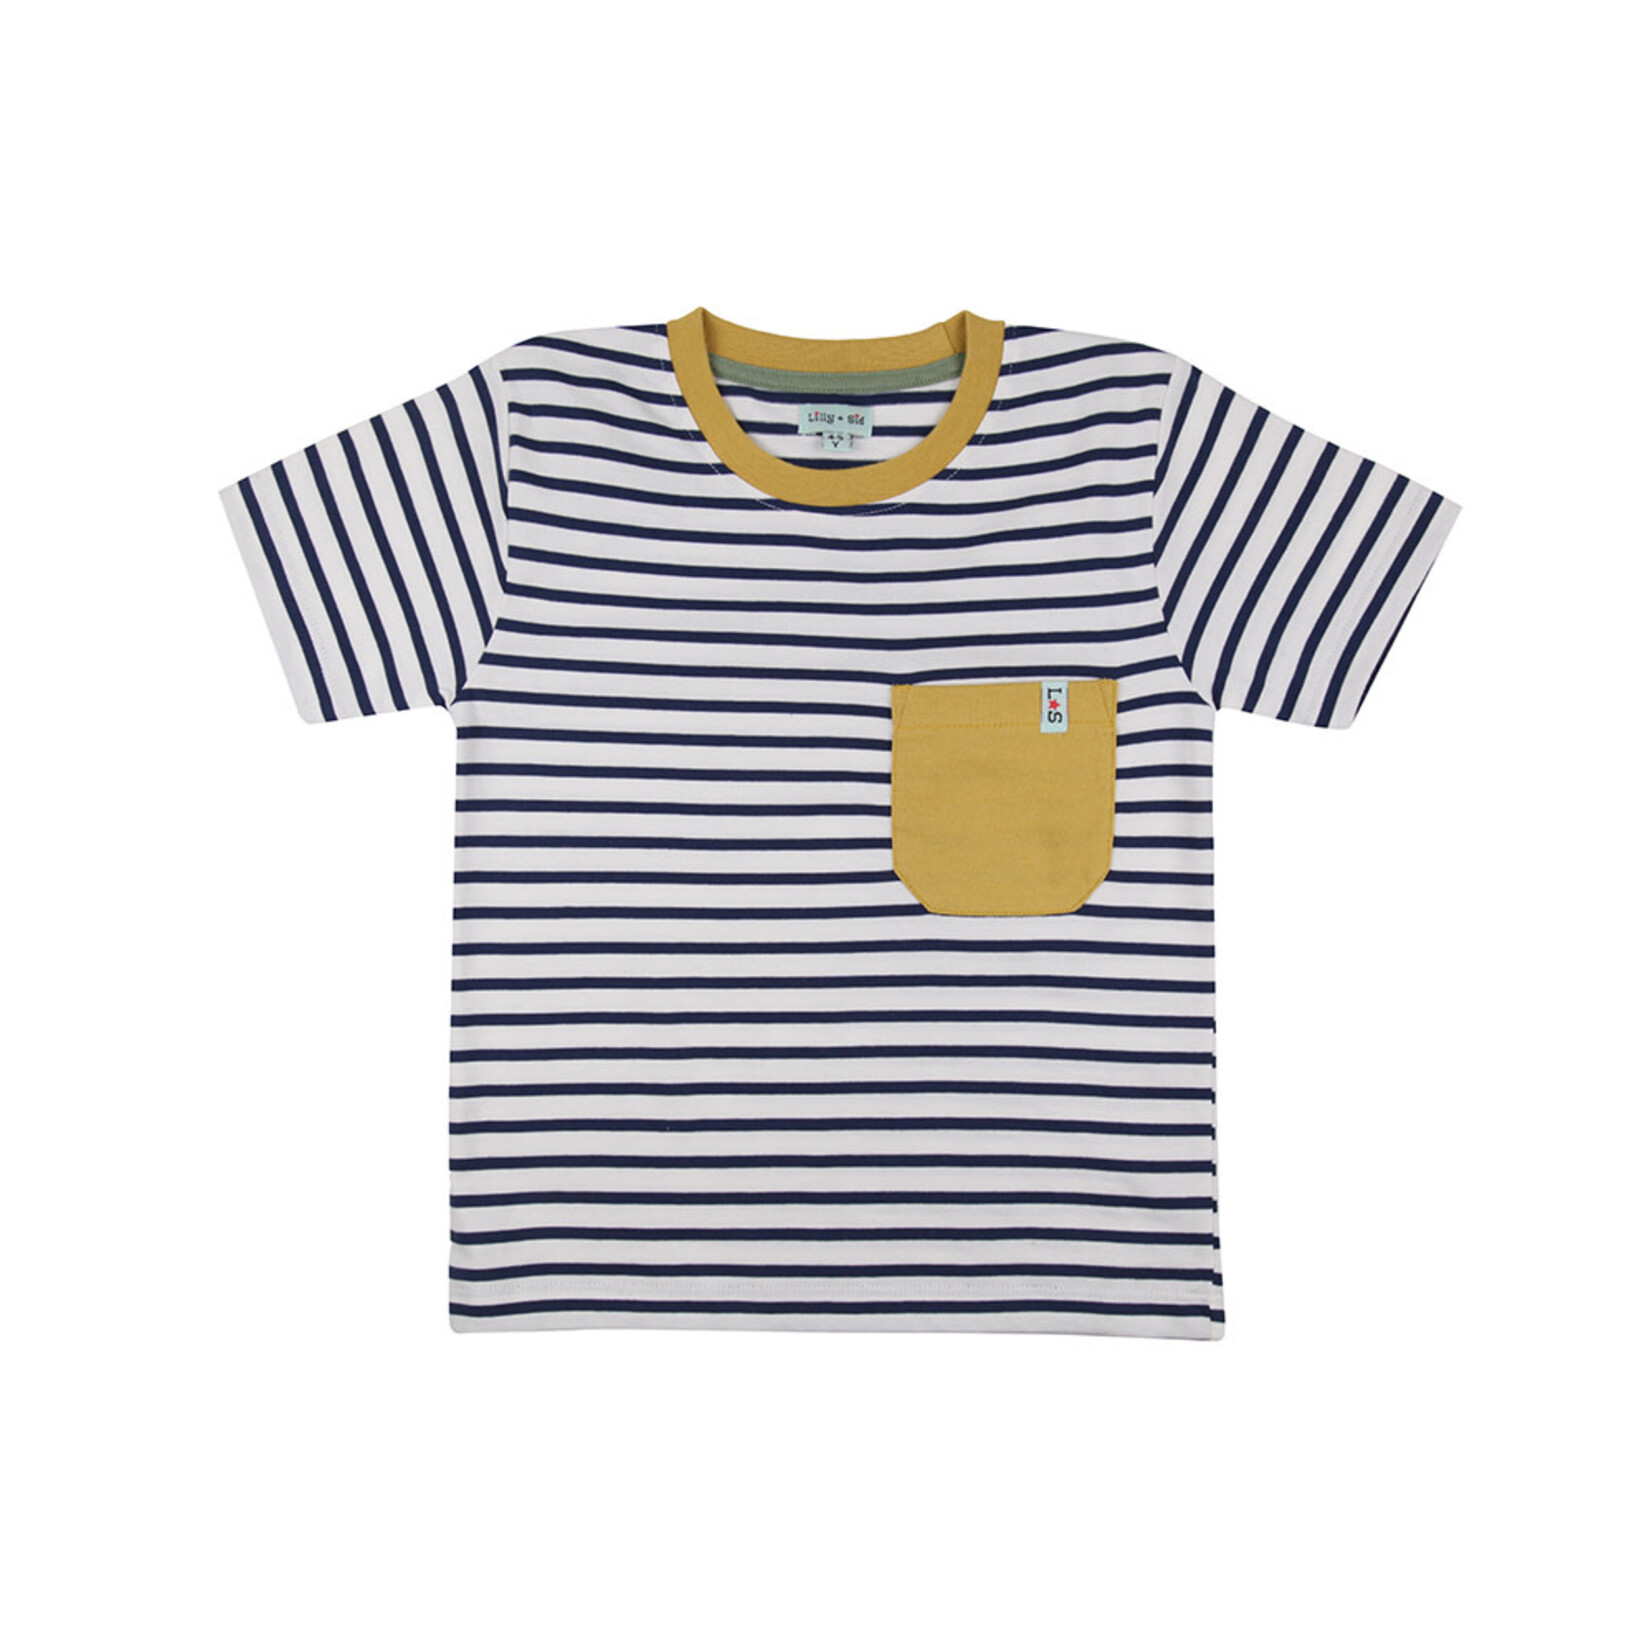 Lilly+Sid  LILLY+SID - Pack of 2 T-Shirts - Dino Print on Green Background and Navy Stripes with Yellow Pocket